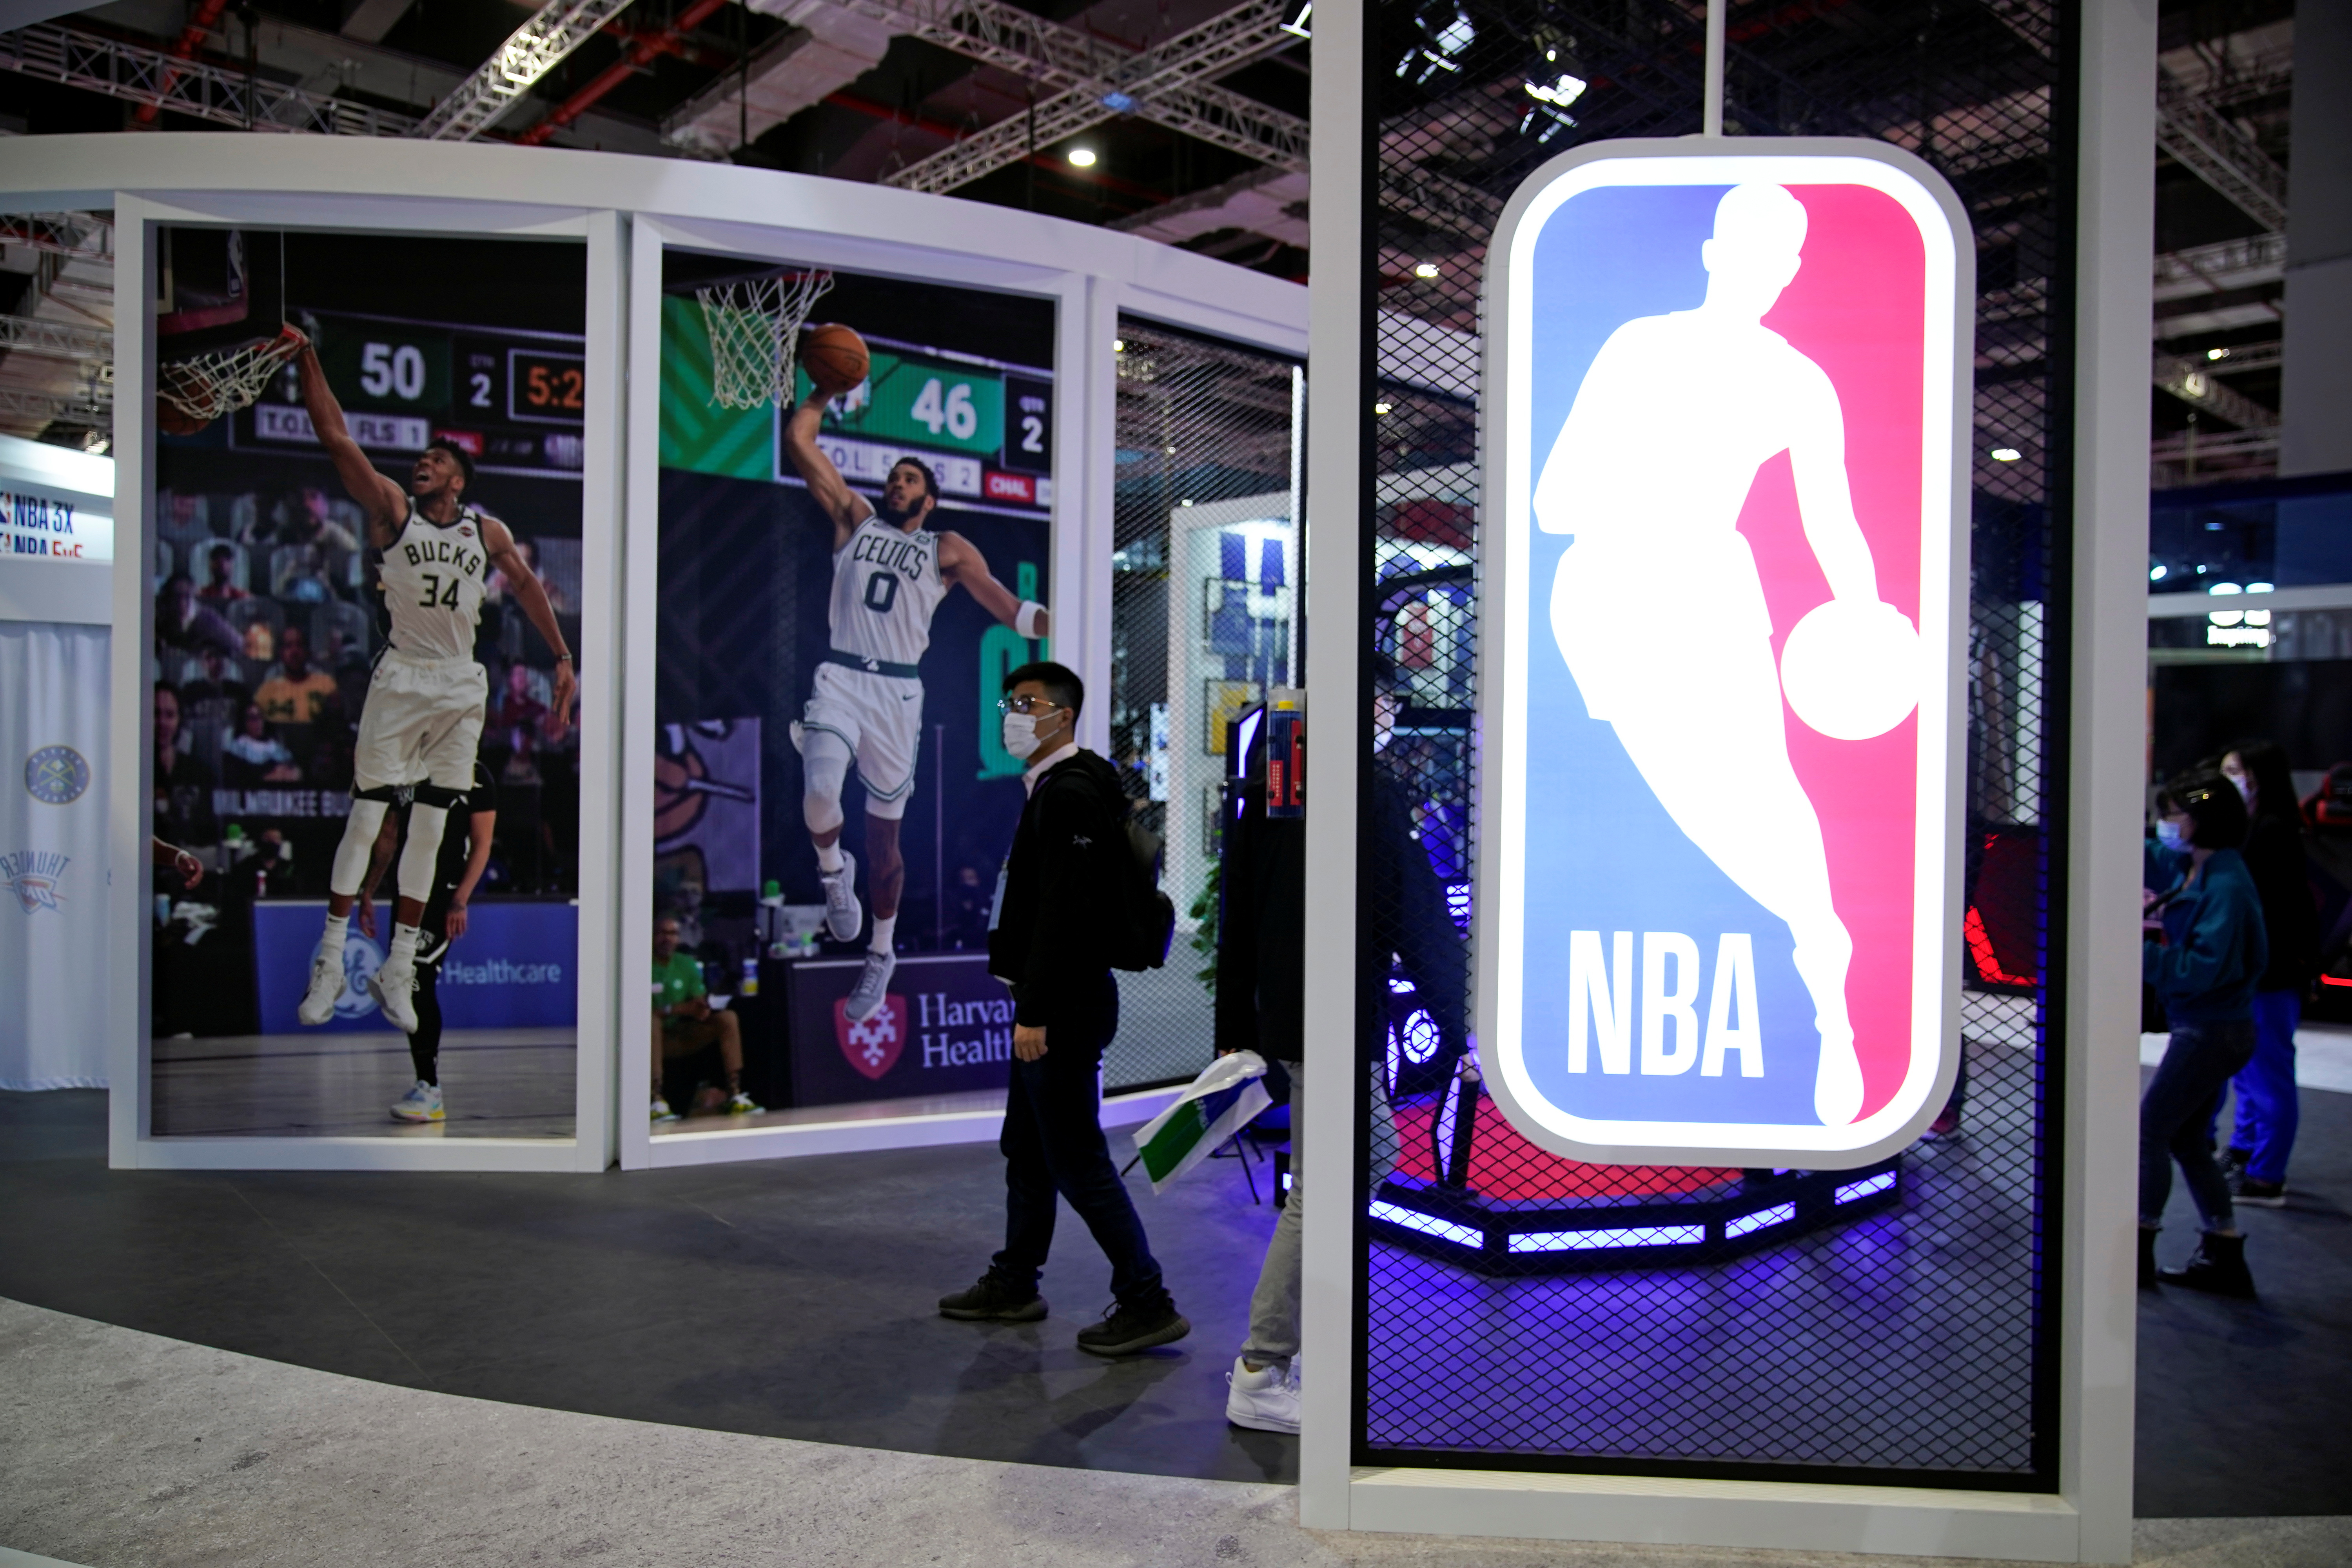 An NBA sign is seen at the third China International Import Expo (CIIE) in Shanghai